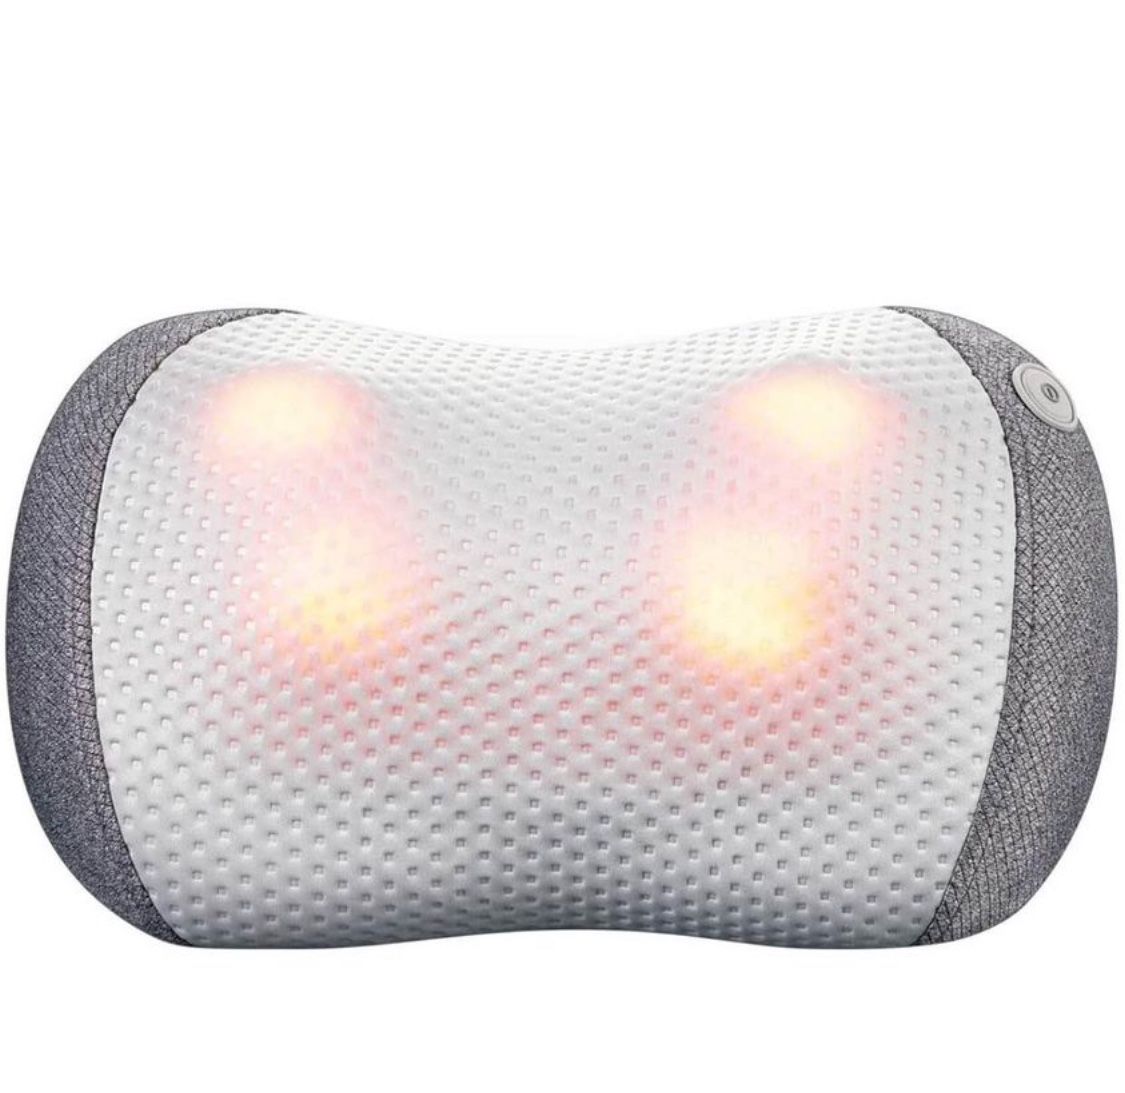 New! Back Neck Massager with Heat, Shiatsu Deep Kneading Massage Pillow for Pain Relief